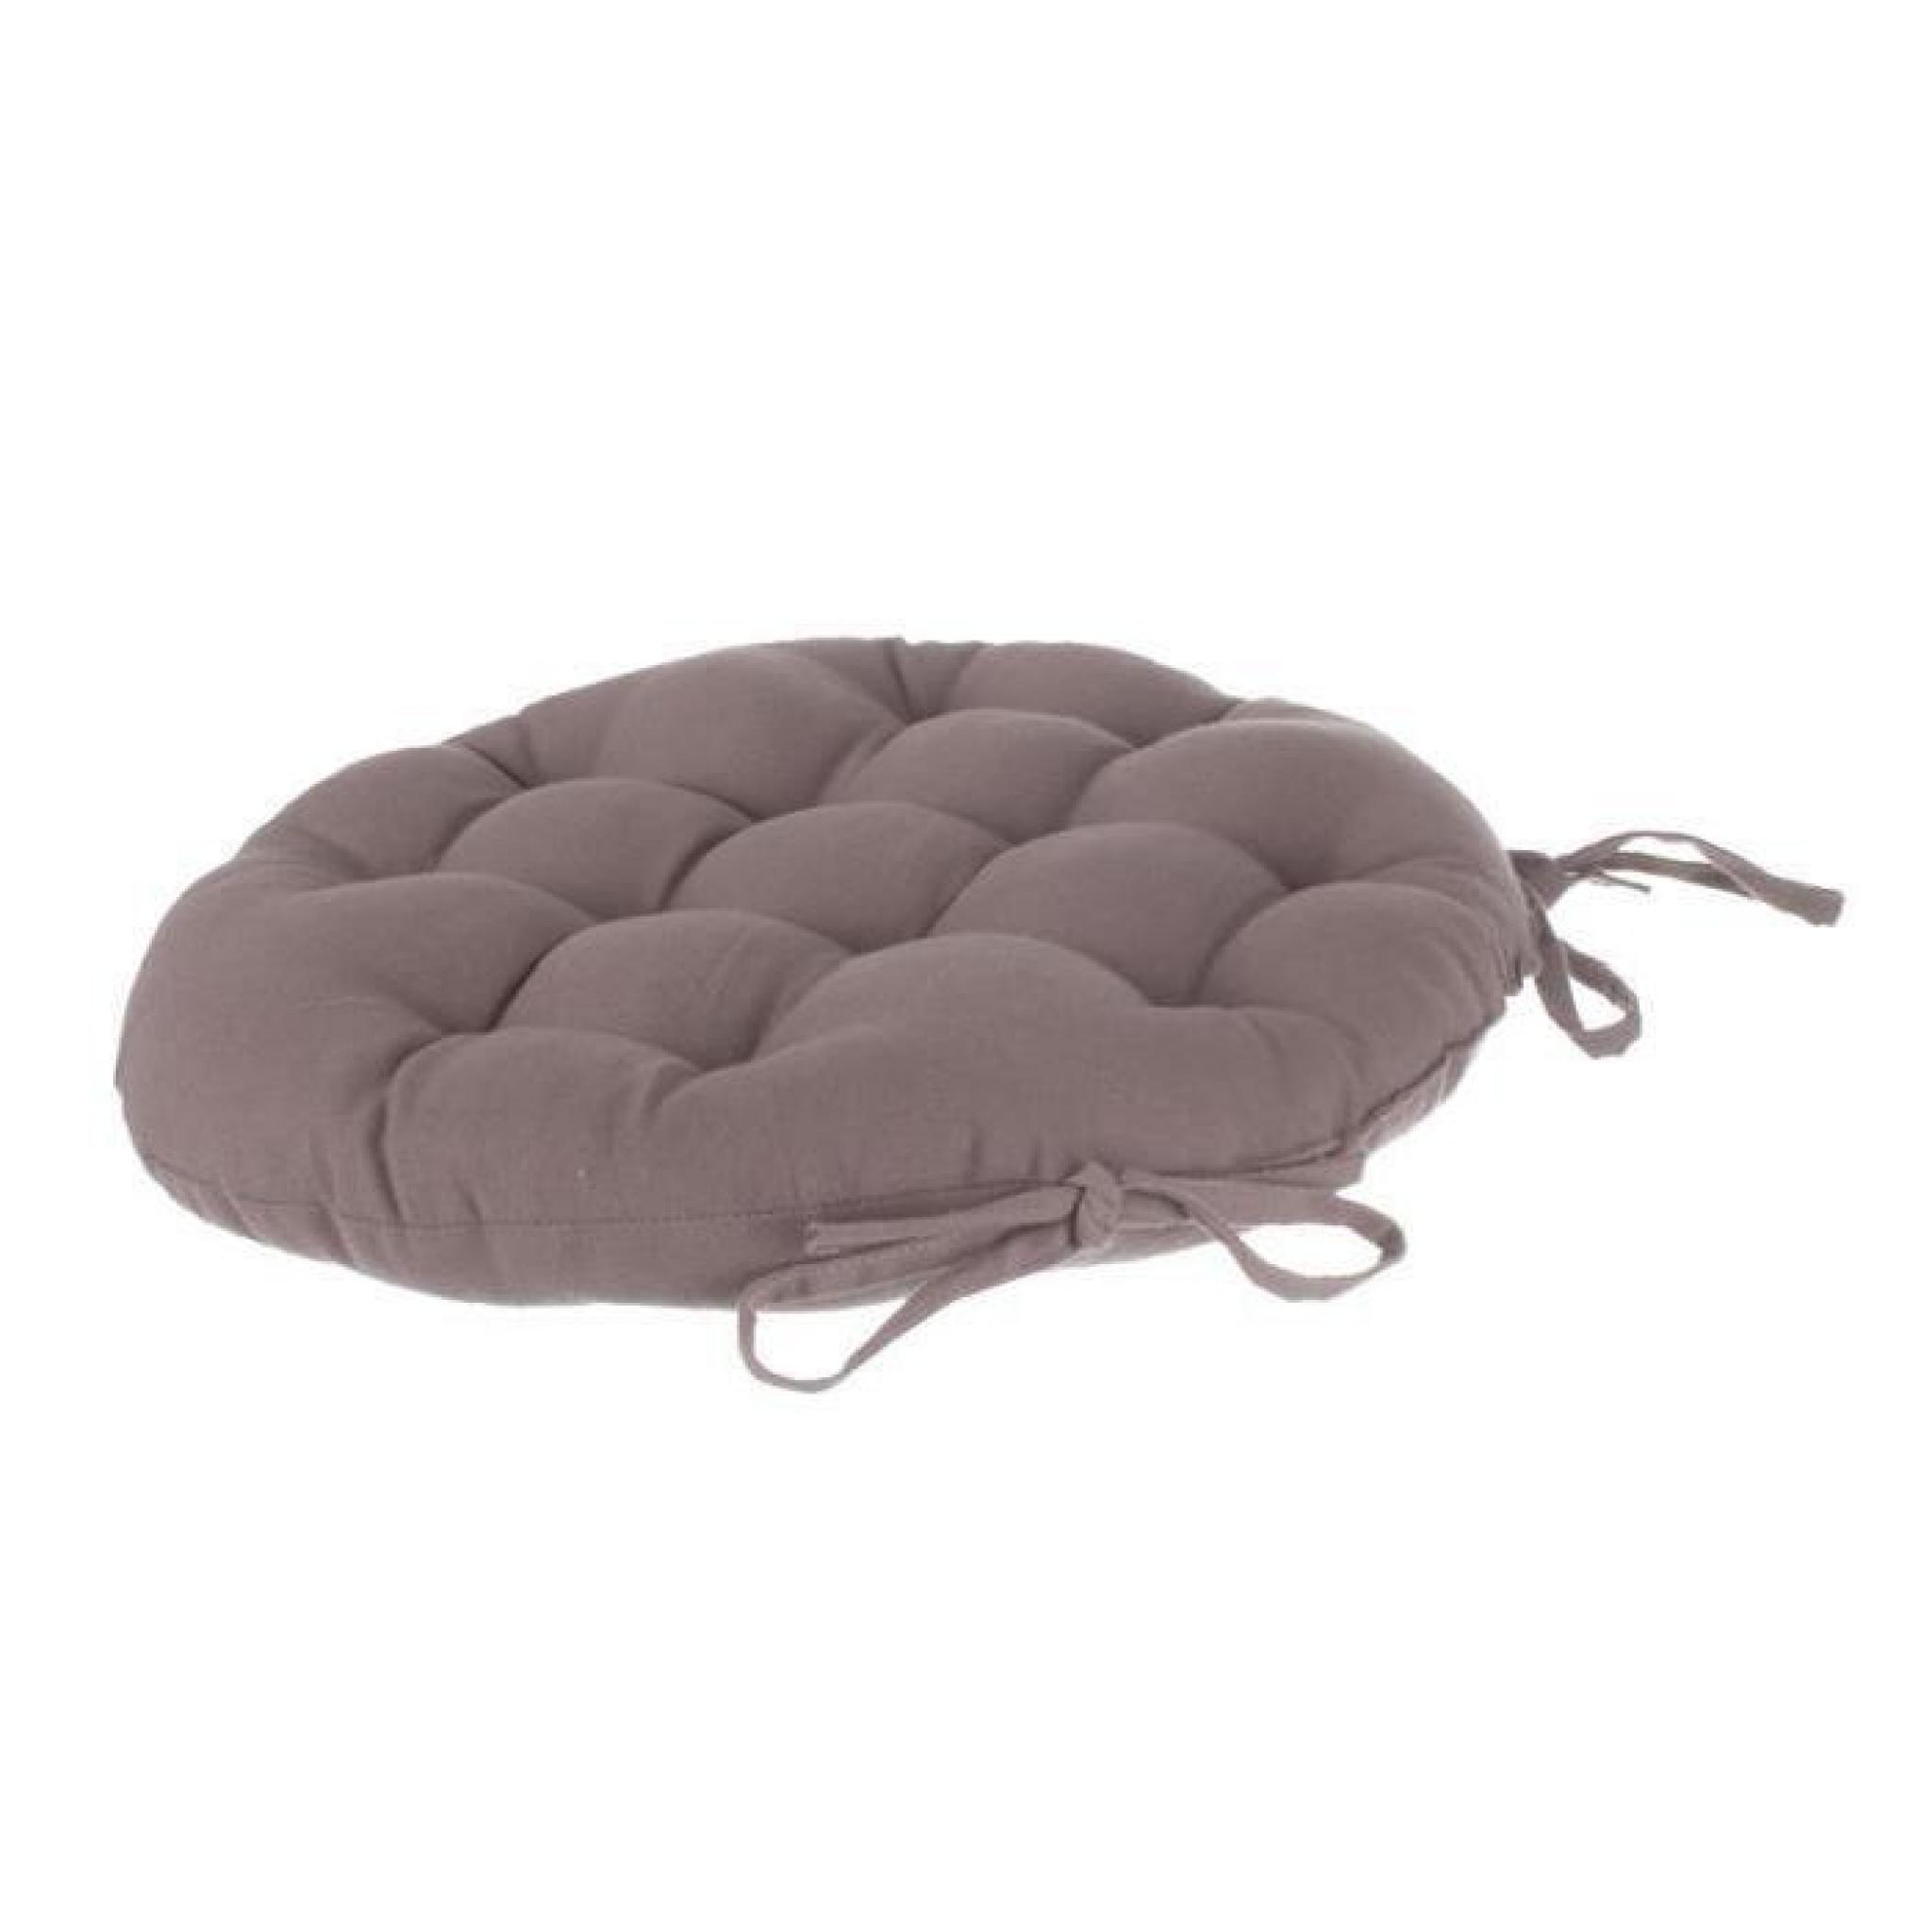 Coussin de chaise ronde Lina Taupe